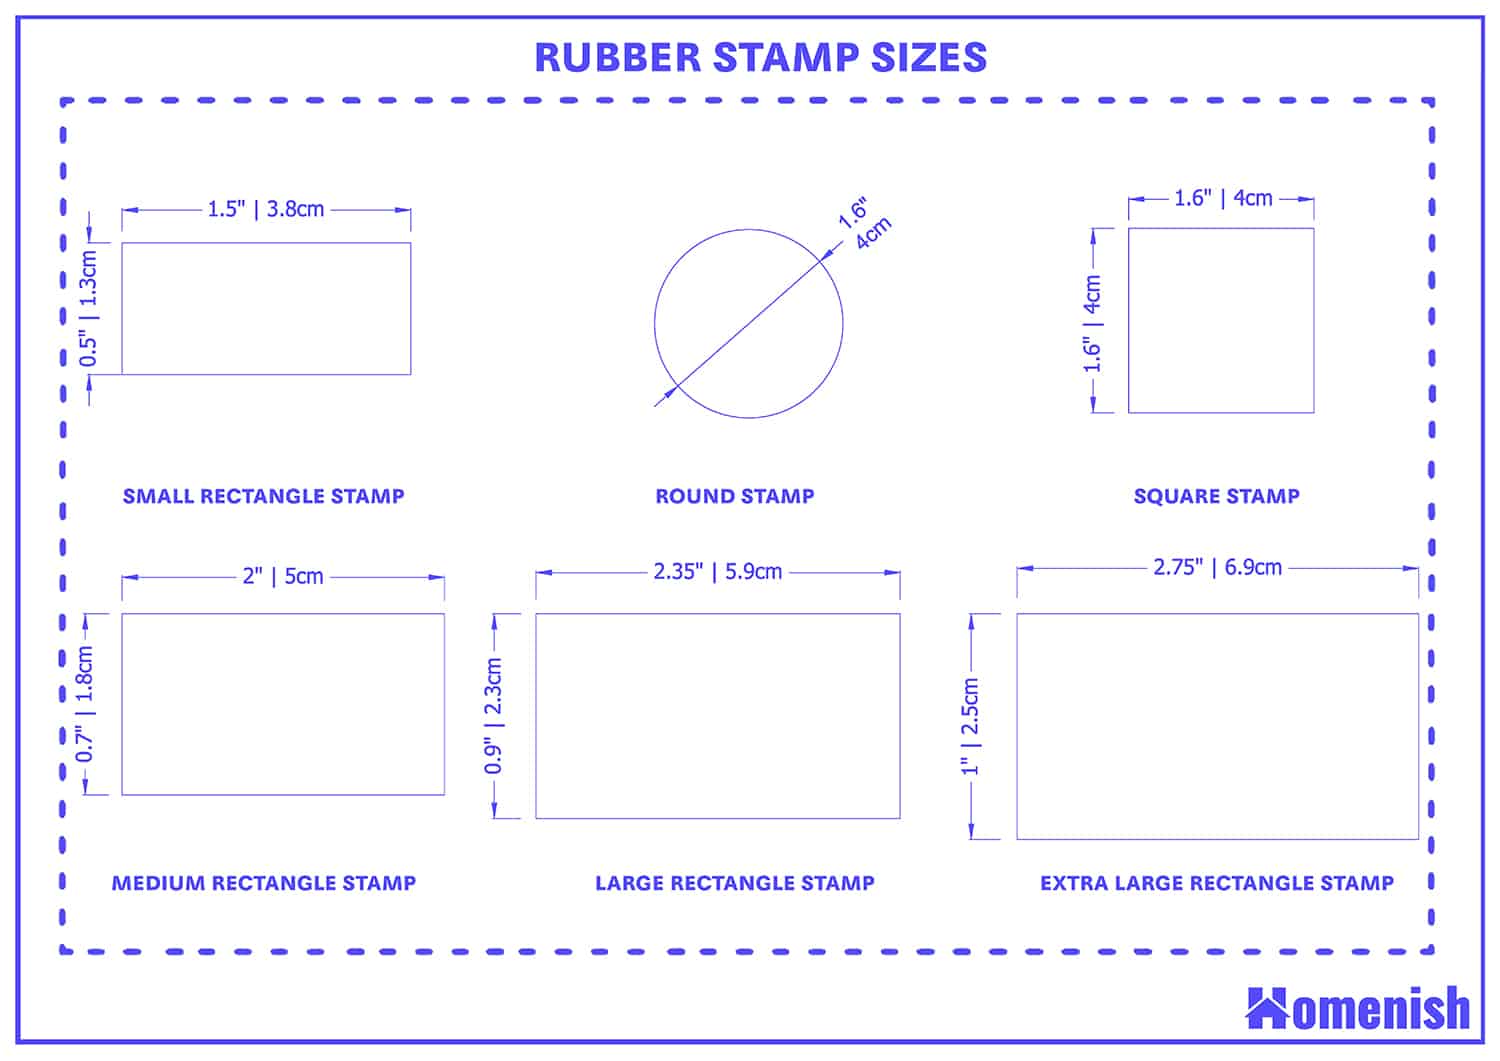 Rubber Stamp Size